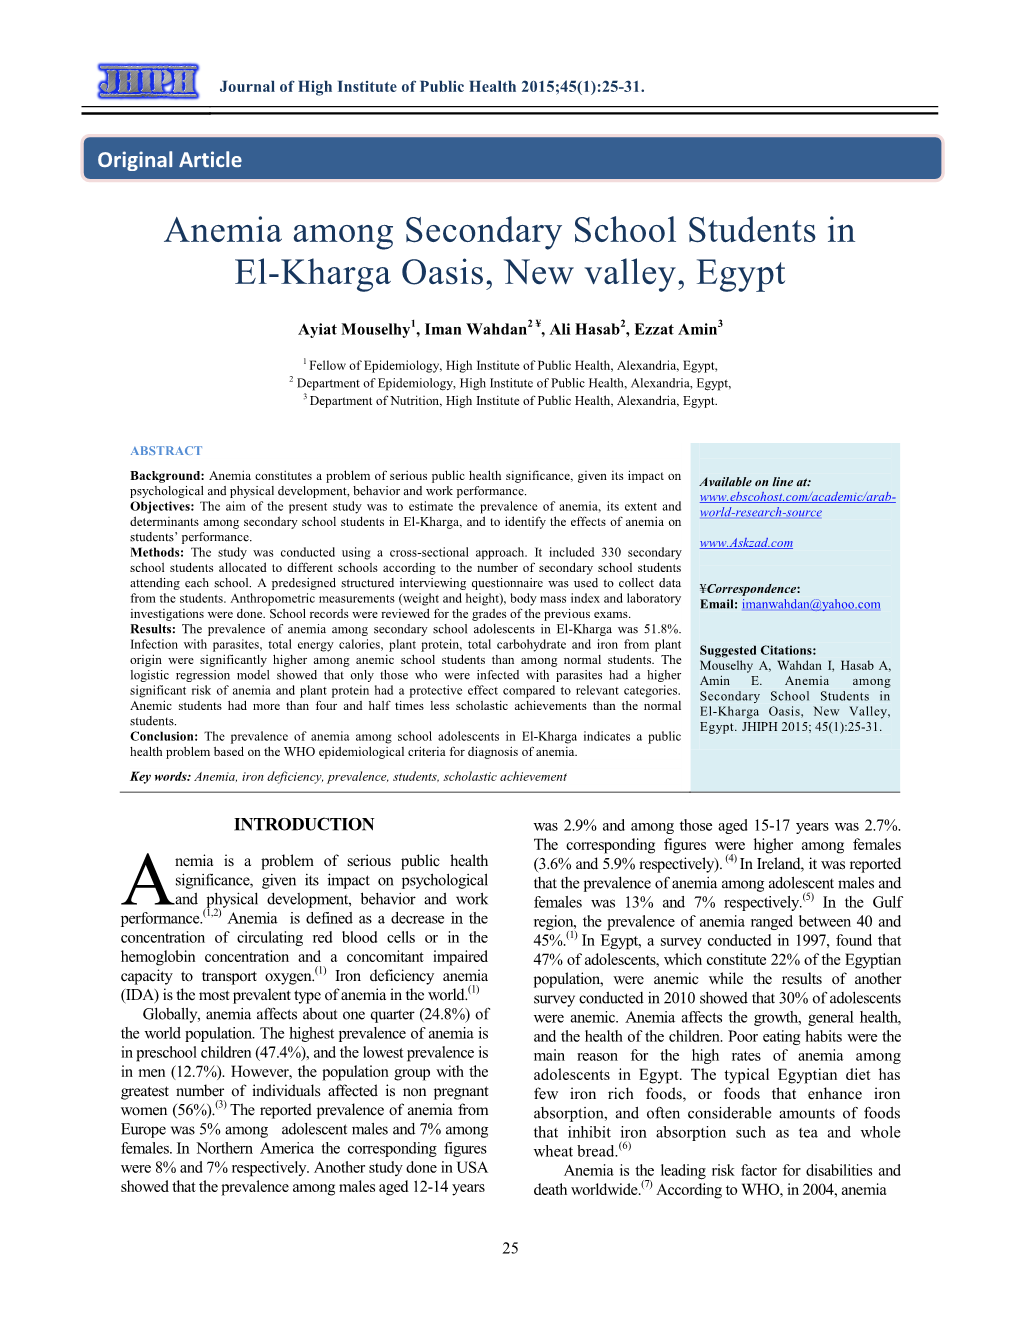 Anemia Among Secondary School Students in El-Kharga Oasis, New Valley, Egypt